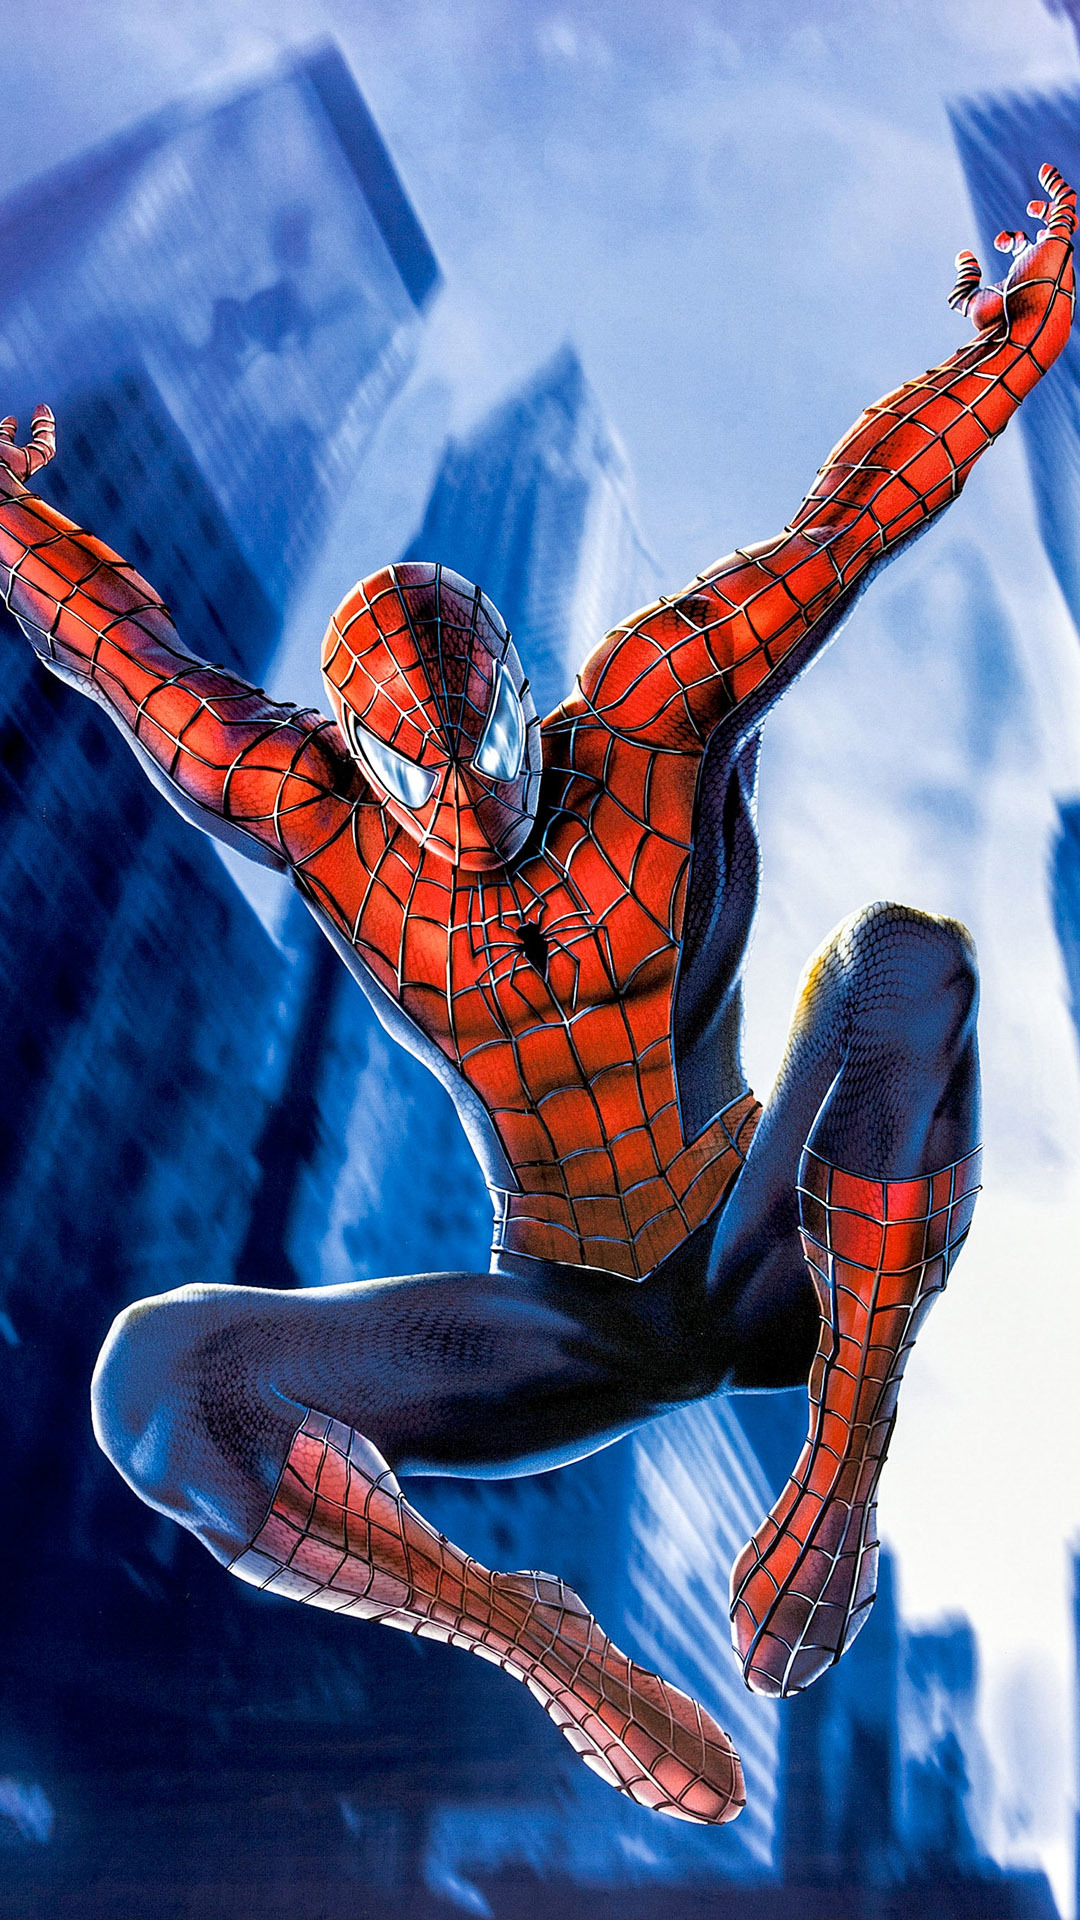 Free Download Spiderman Backgrounds for Iphone ...